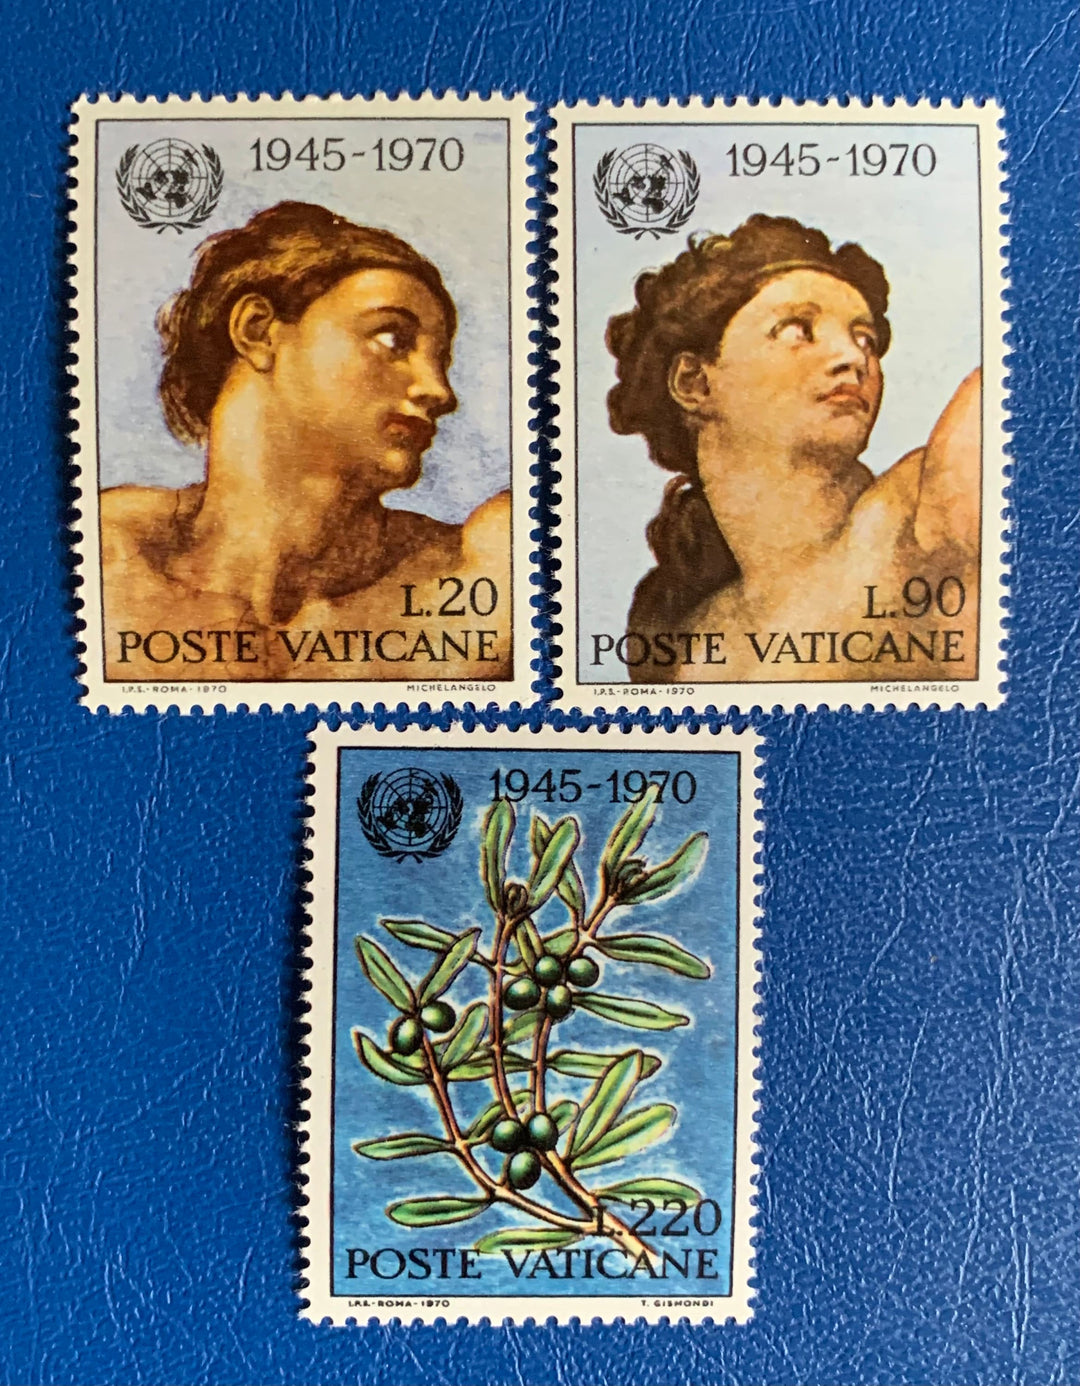 Vatican - Original Vintage Postage Stamps- 1970 UN 25th Anniversary - for the collector, artist or crafter